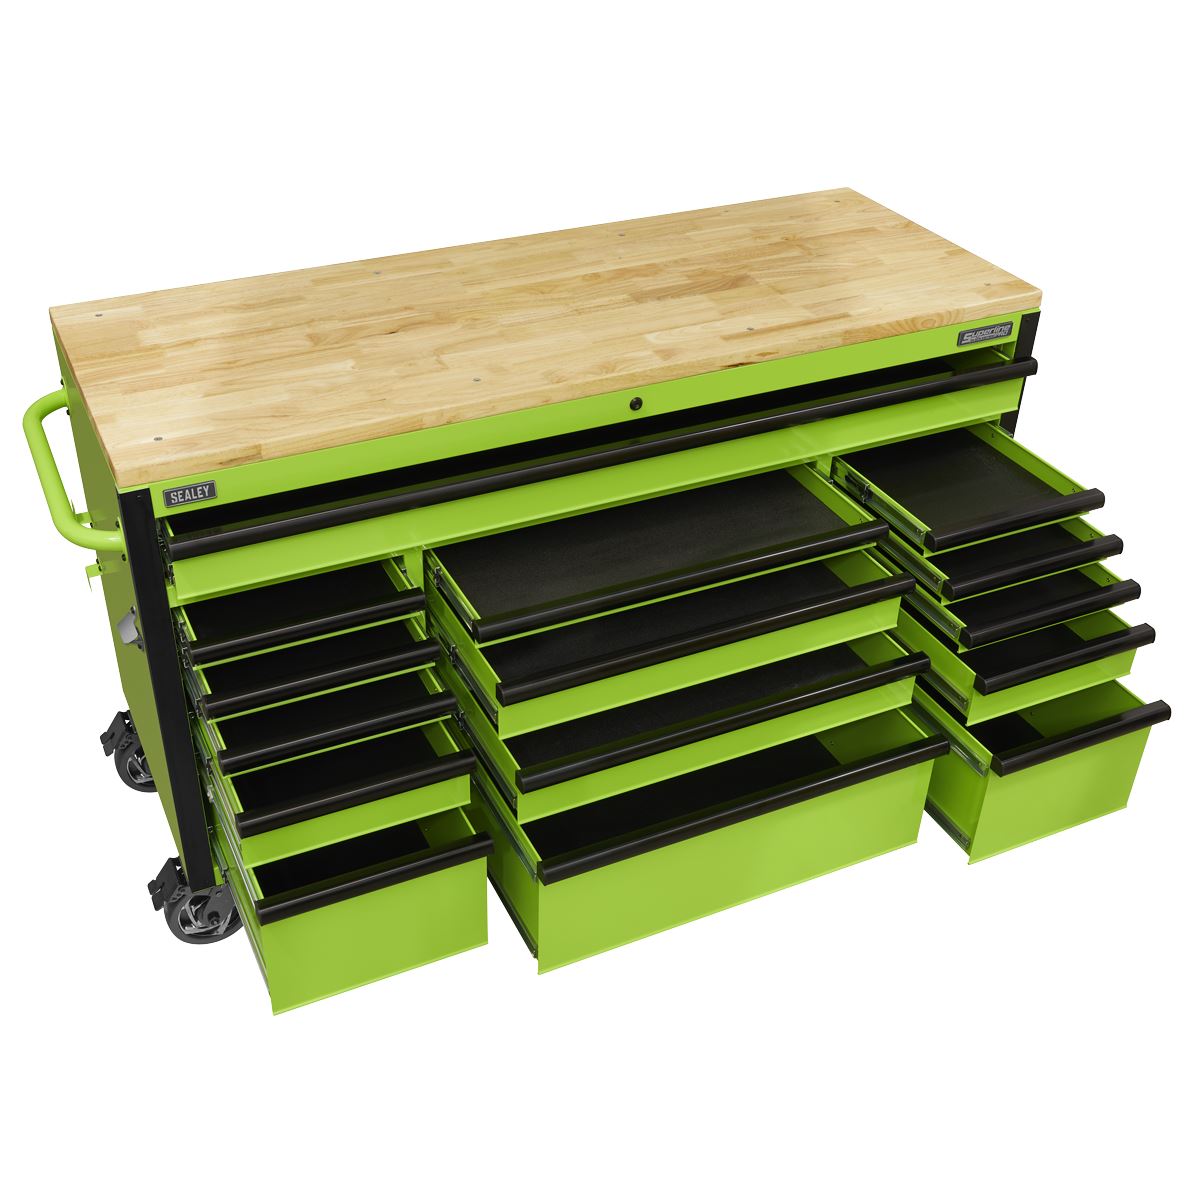 Sealey Superline Pro 15 Drawer Mobile Trolley with Wooden Worktop 1549mm